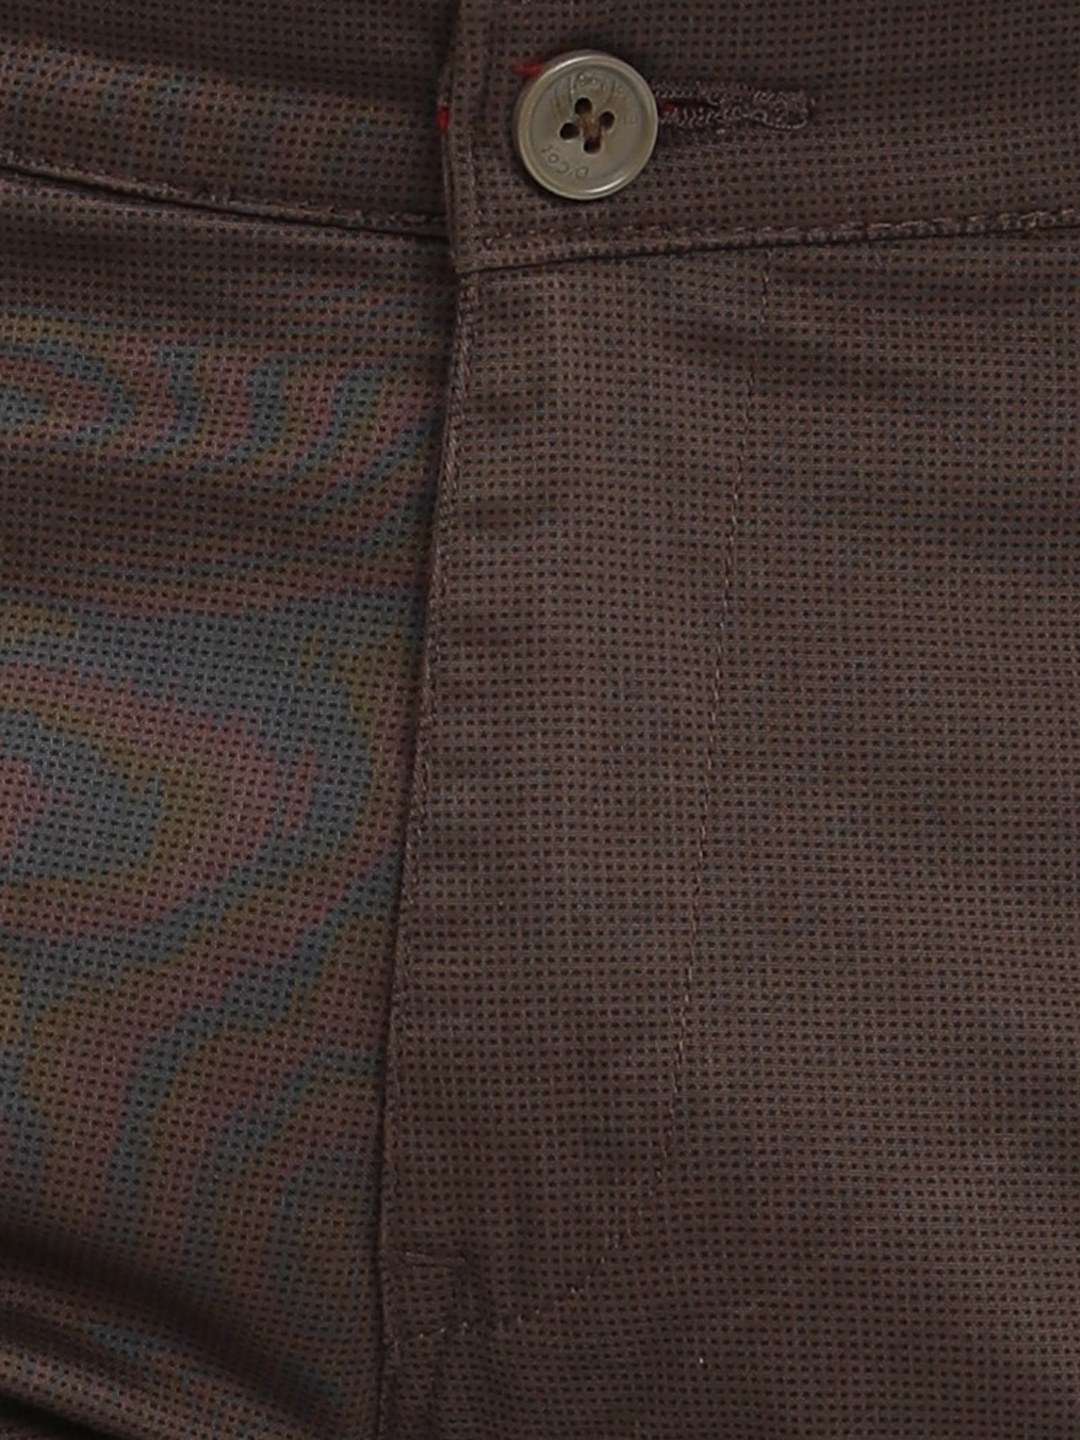 D'cot by Donear | D'cot by Donear Men's Brown Cotton Trousers 5